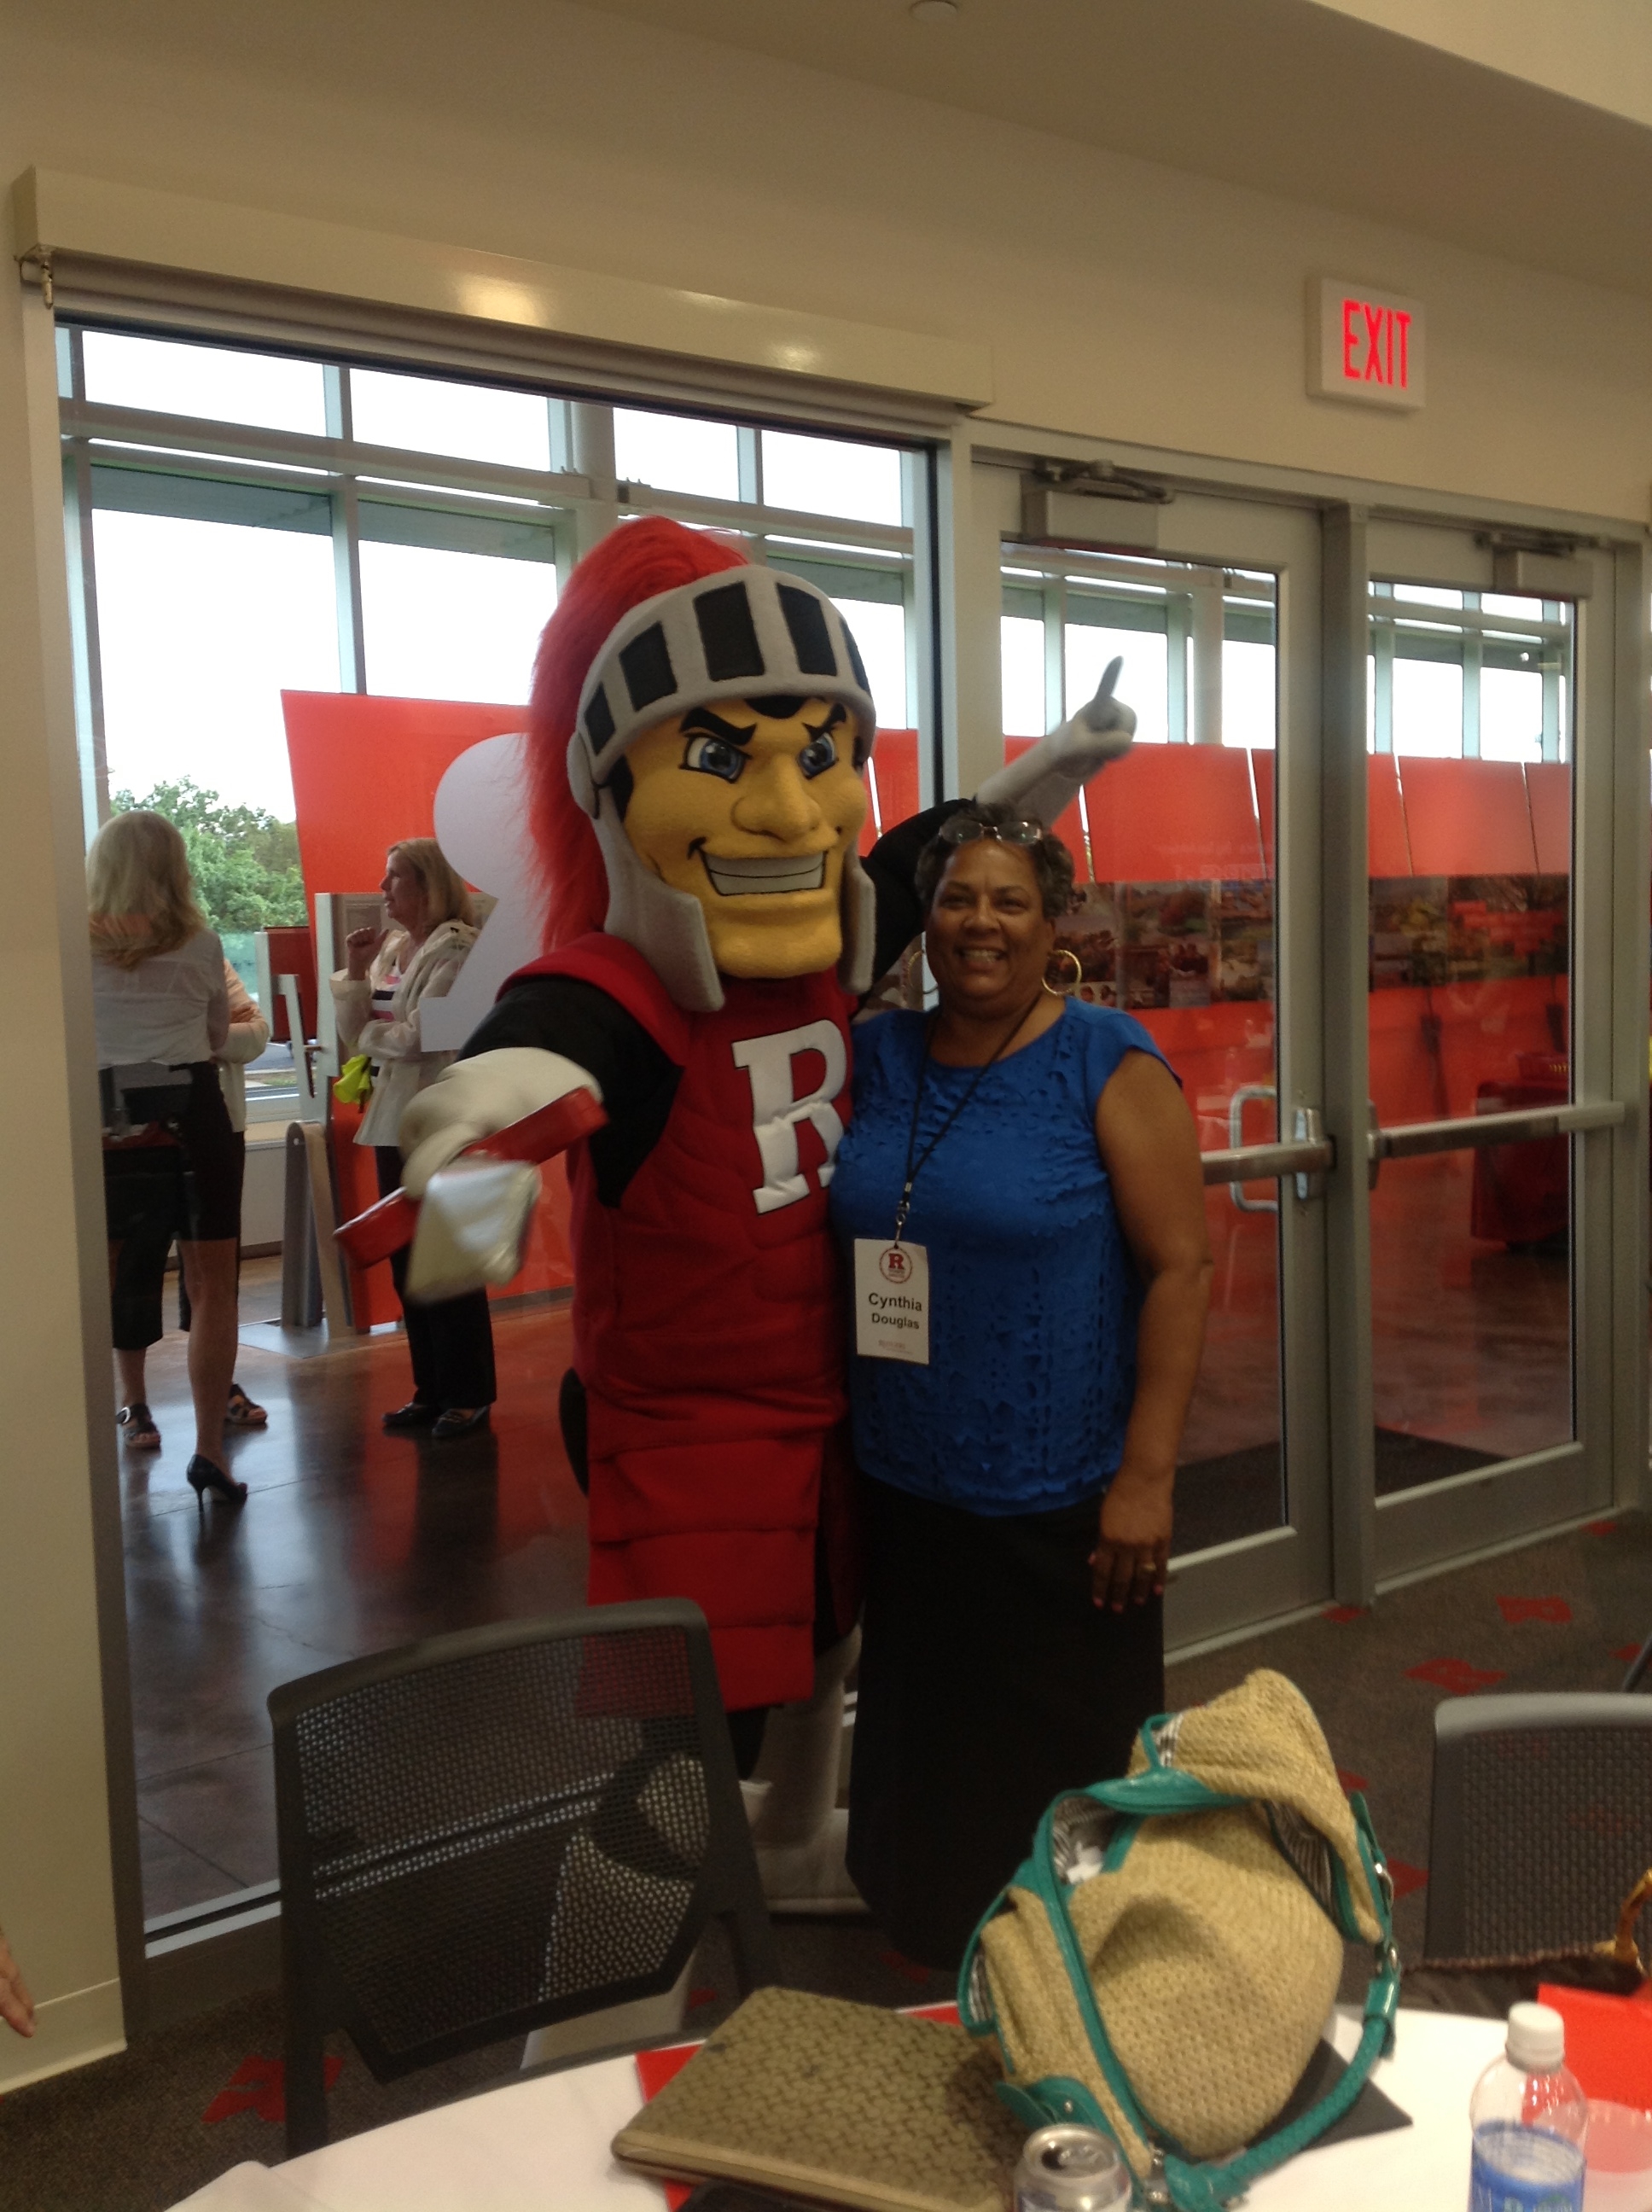 http://www.newvision-mccullydownstatepioneers.org/wp-content/uploads/2014/12/Cynthia-Douglas-with-rutgers-mascot.jpg